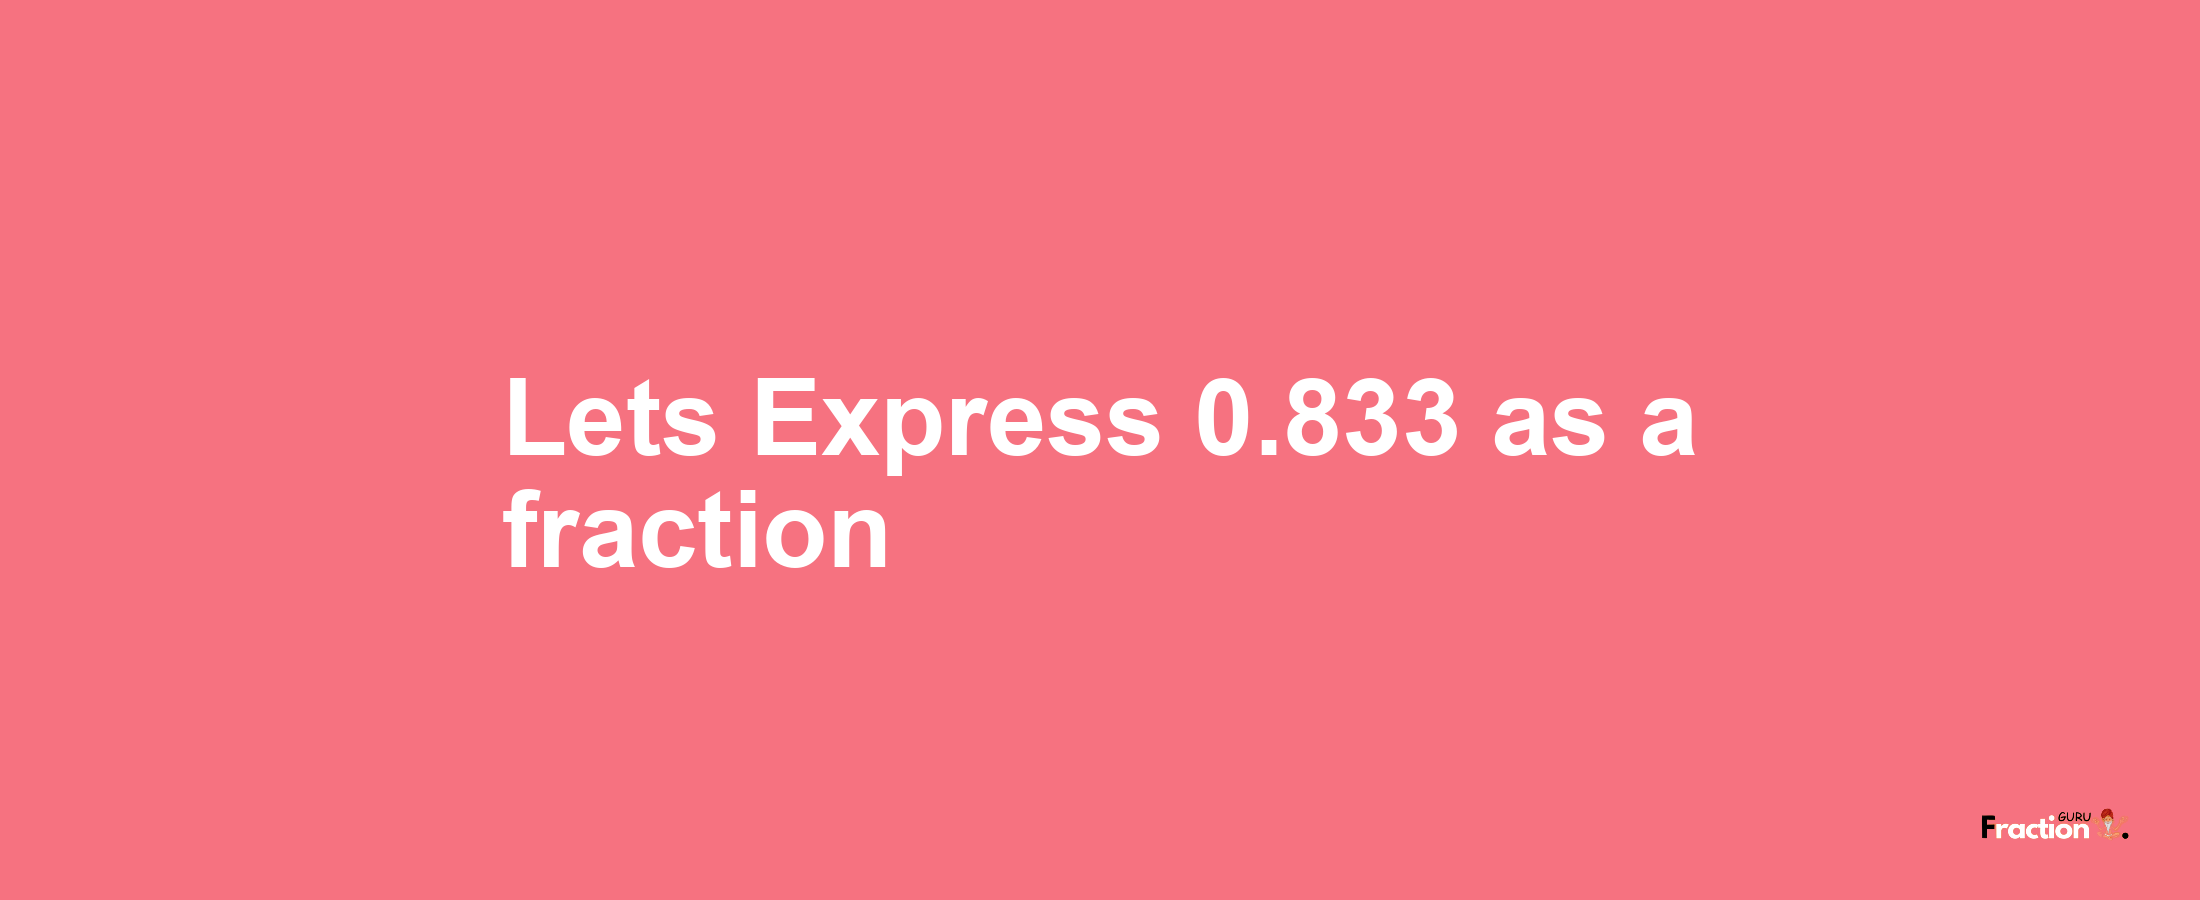 Lets Express 0.833 as afraction